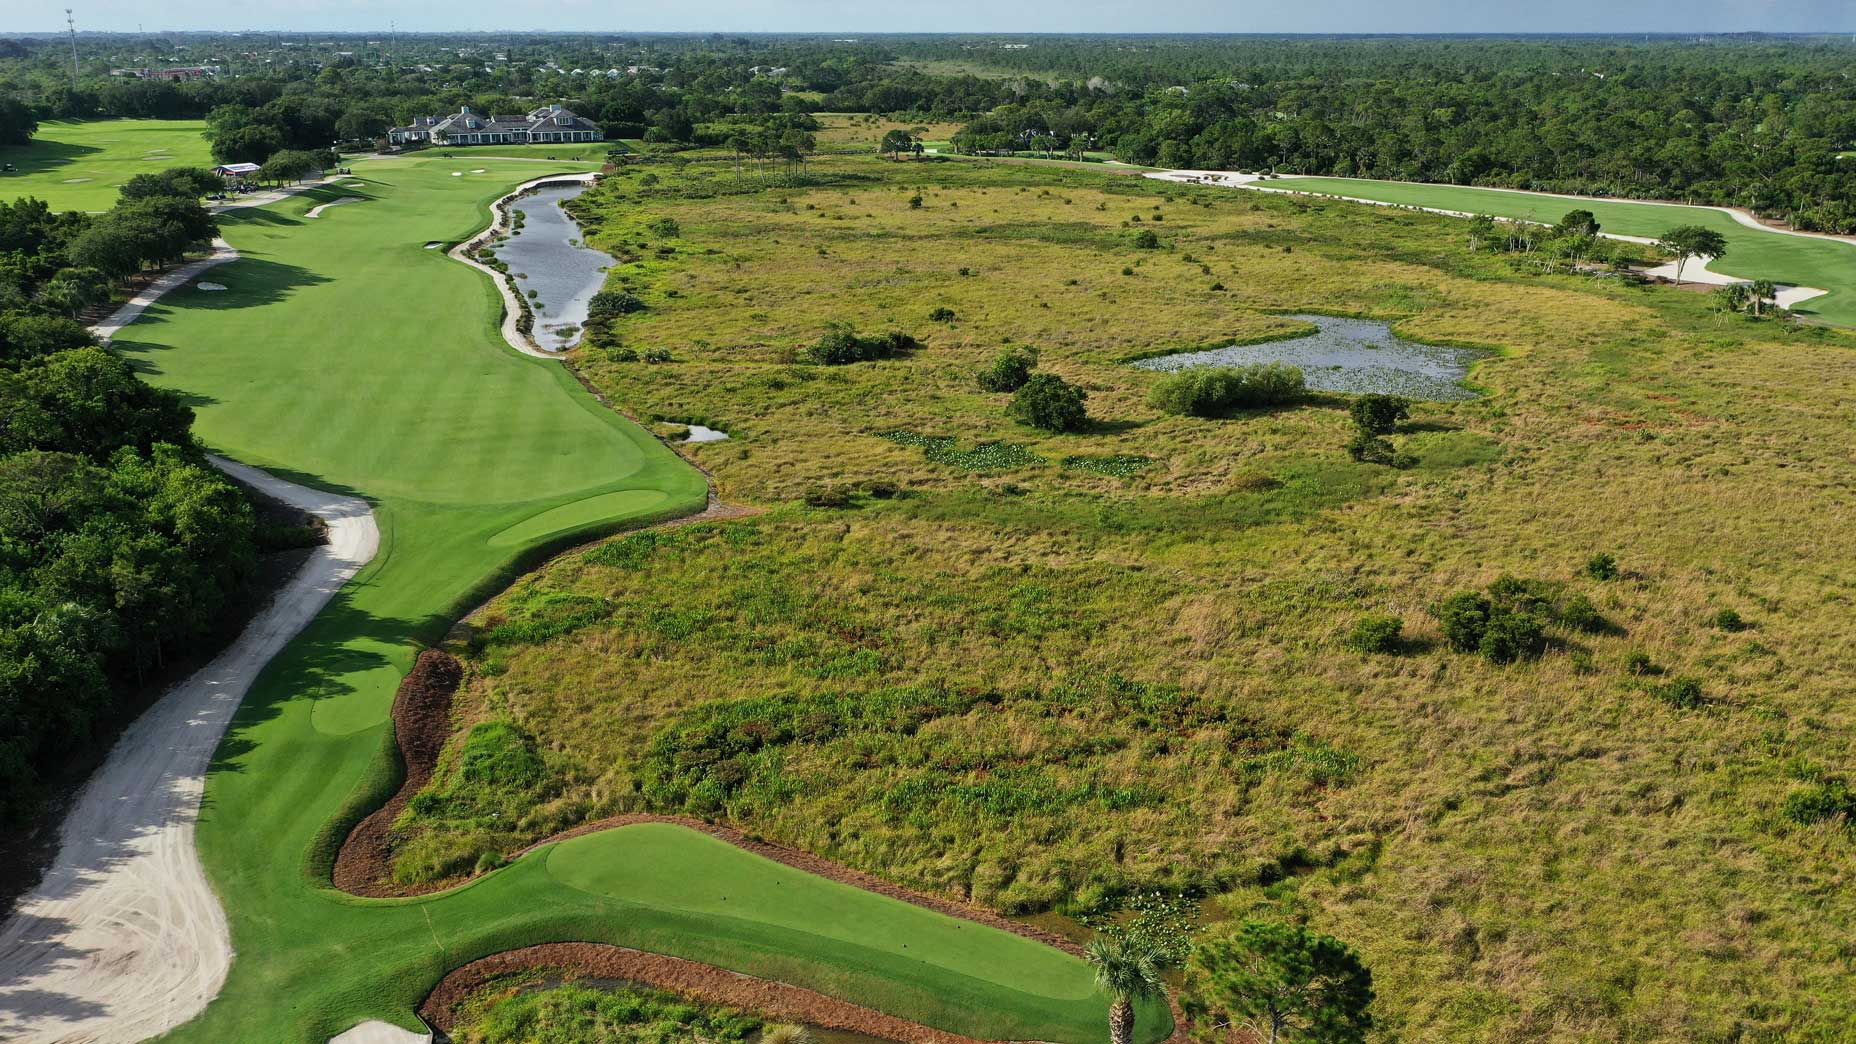 An aerial drone view of the 18th hole at Medalist Golf Club.